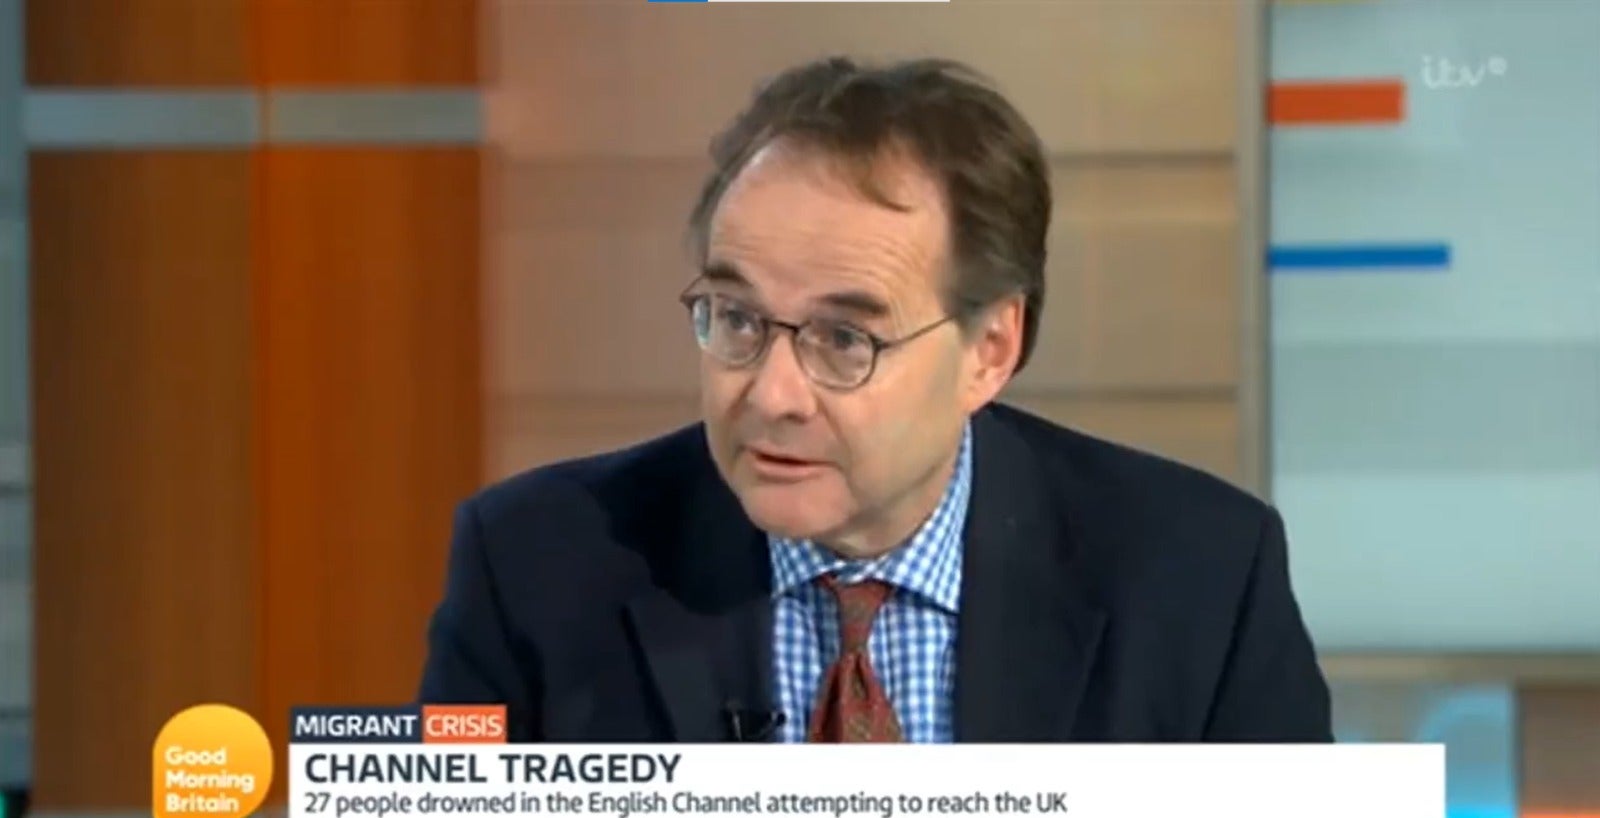 Journalist Quentin Letts prompts backlash for suggesting those who cross the Channel come for ‘jobs’ and ‘benefits’